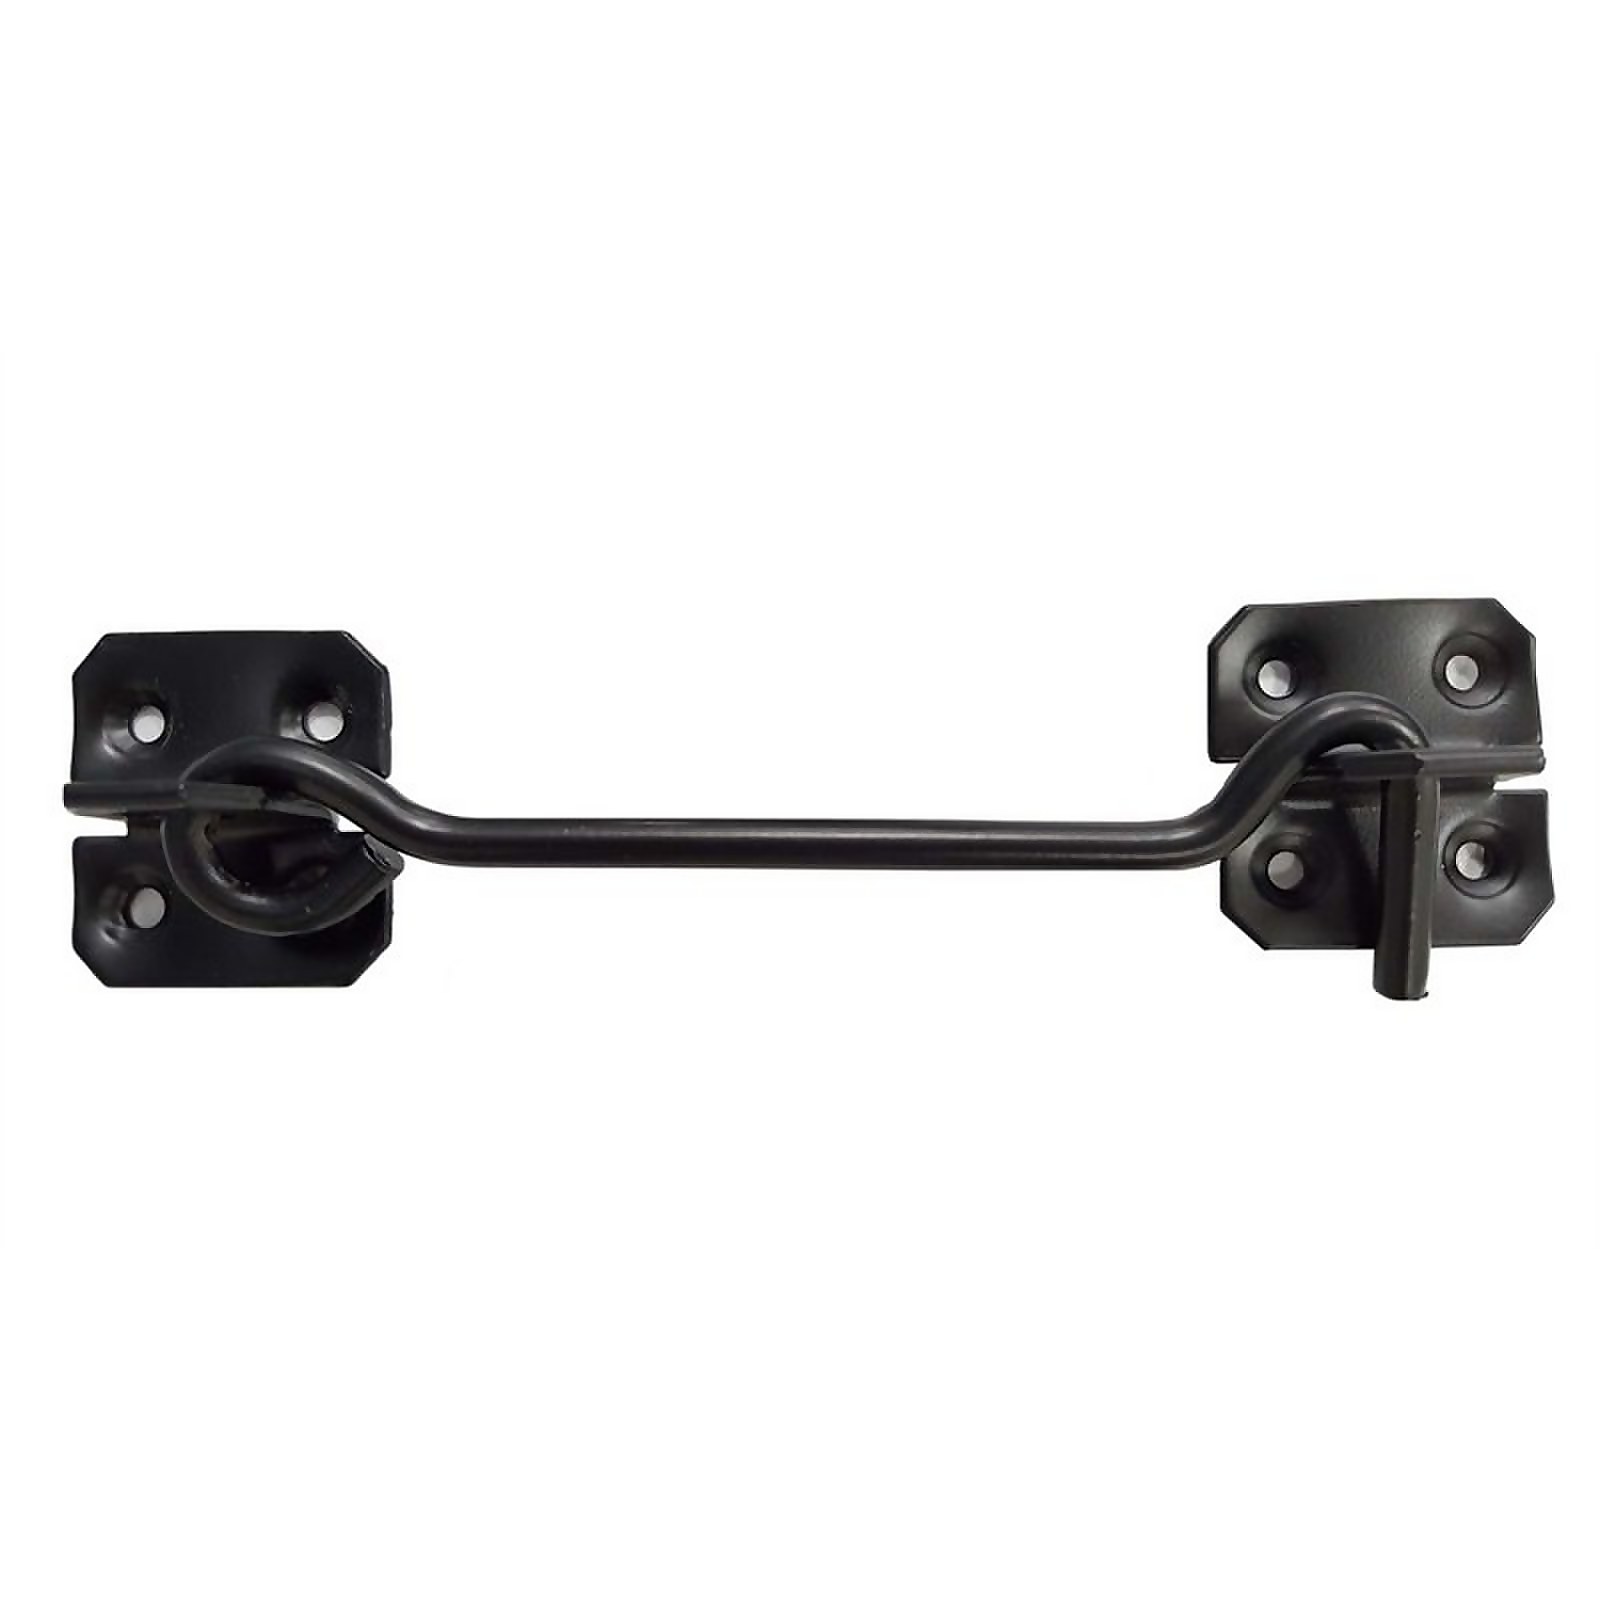 Photo of Wire Cabin Hook - Black - 152mm